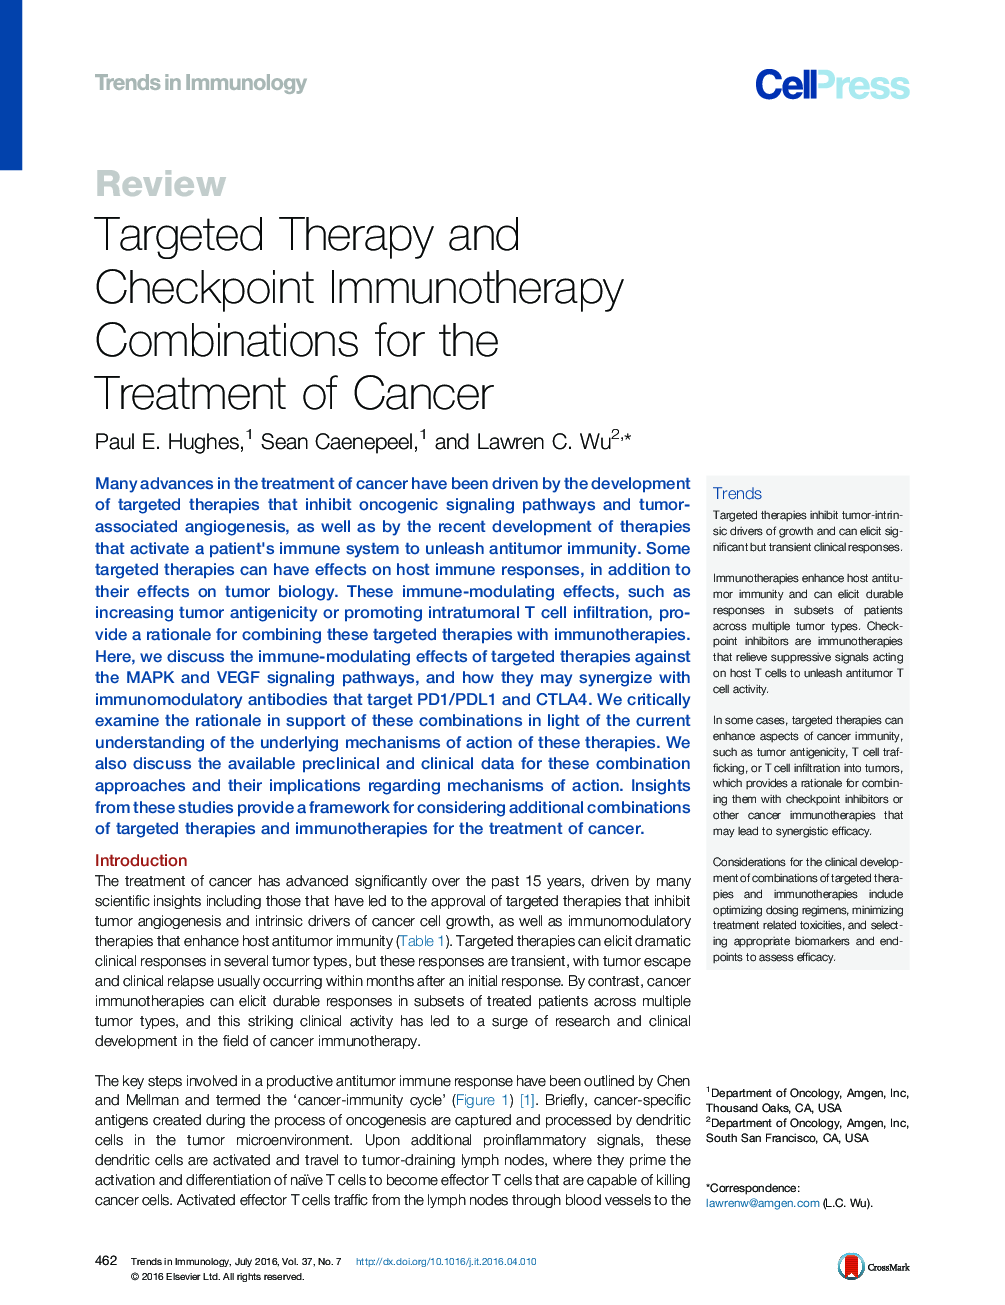 Targeted Therapy and Checkpoint Immunotherapy Combinations for the Treatment of Cancer